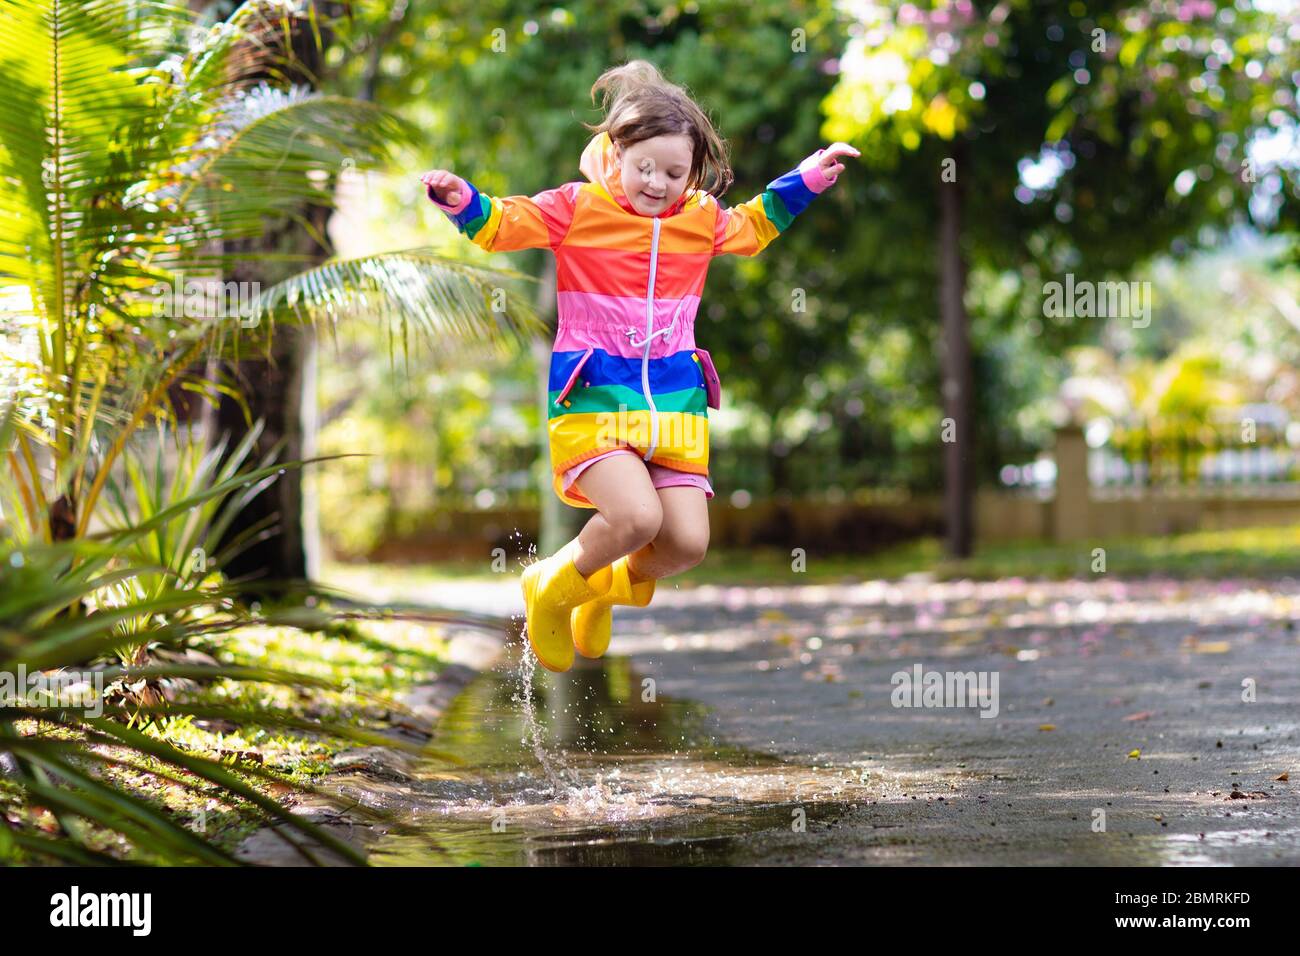 Kid playing in the rain in autumn park. Child jumping in muddy puddle on rainy fall day. Little girl in rain boots and rainbow jacket outdoors in heav Stock Photo